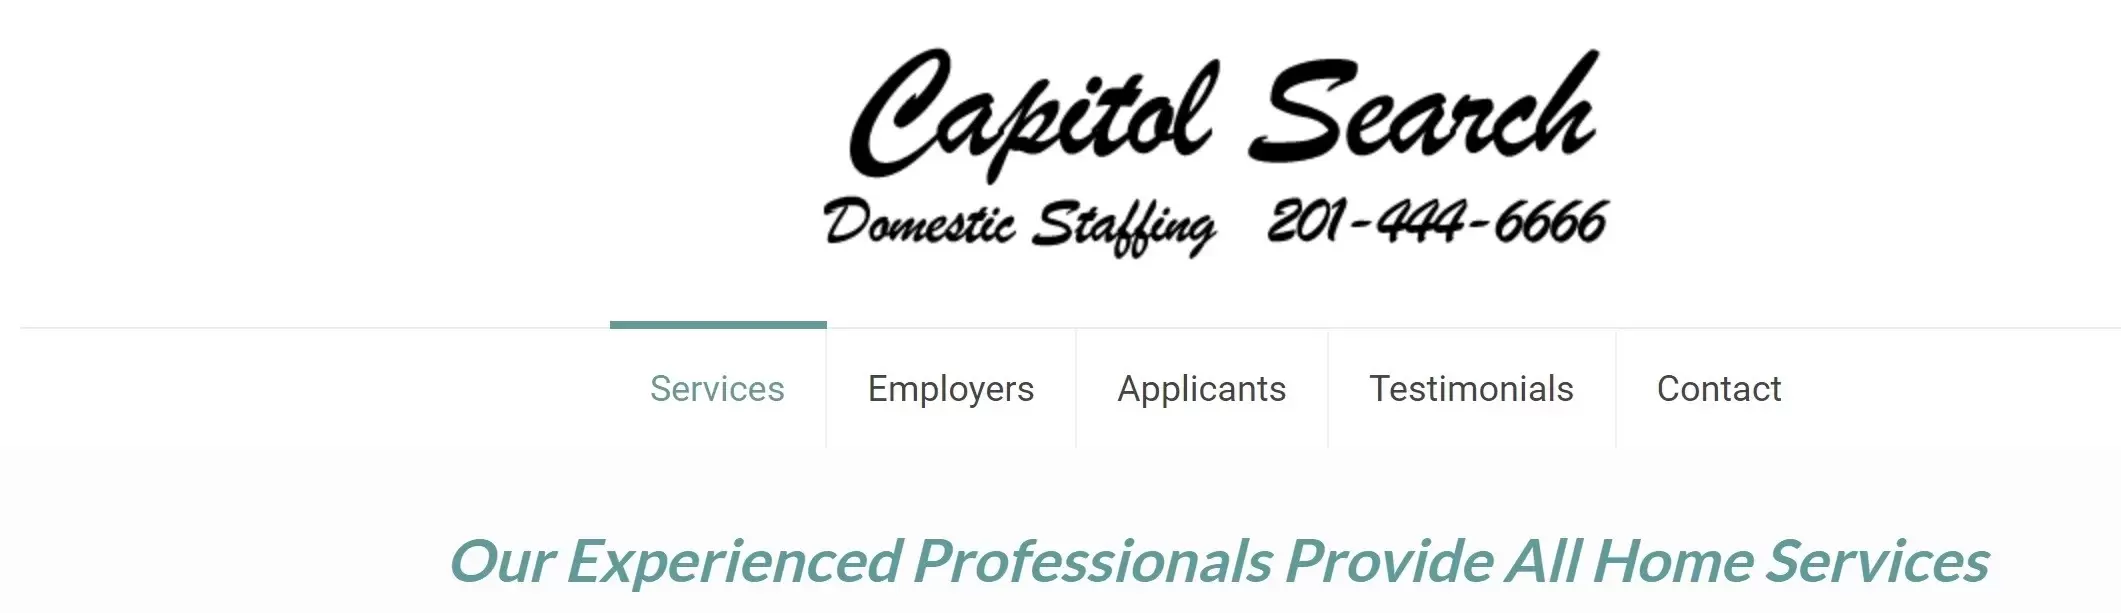 Capitol Search Domestic Staffing company profile and reviews